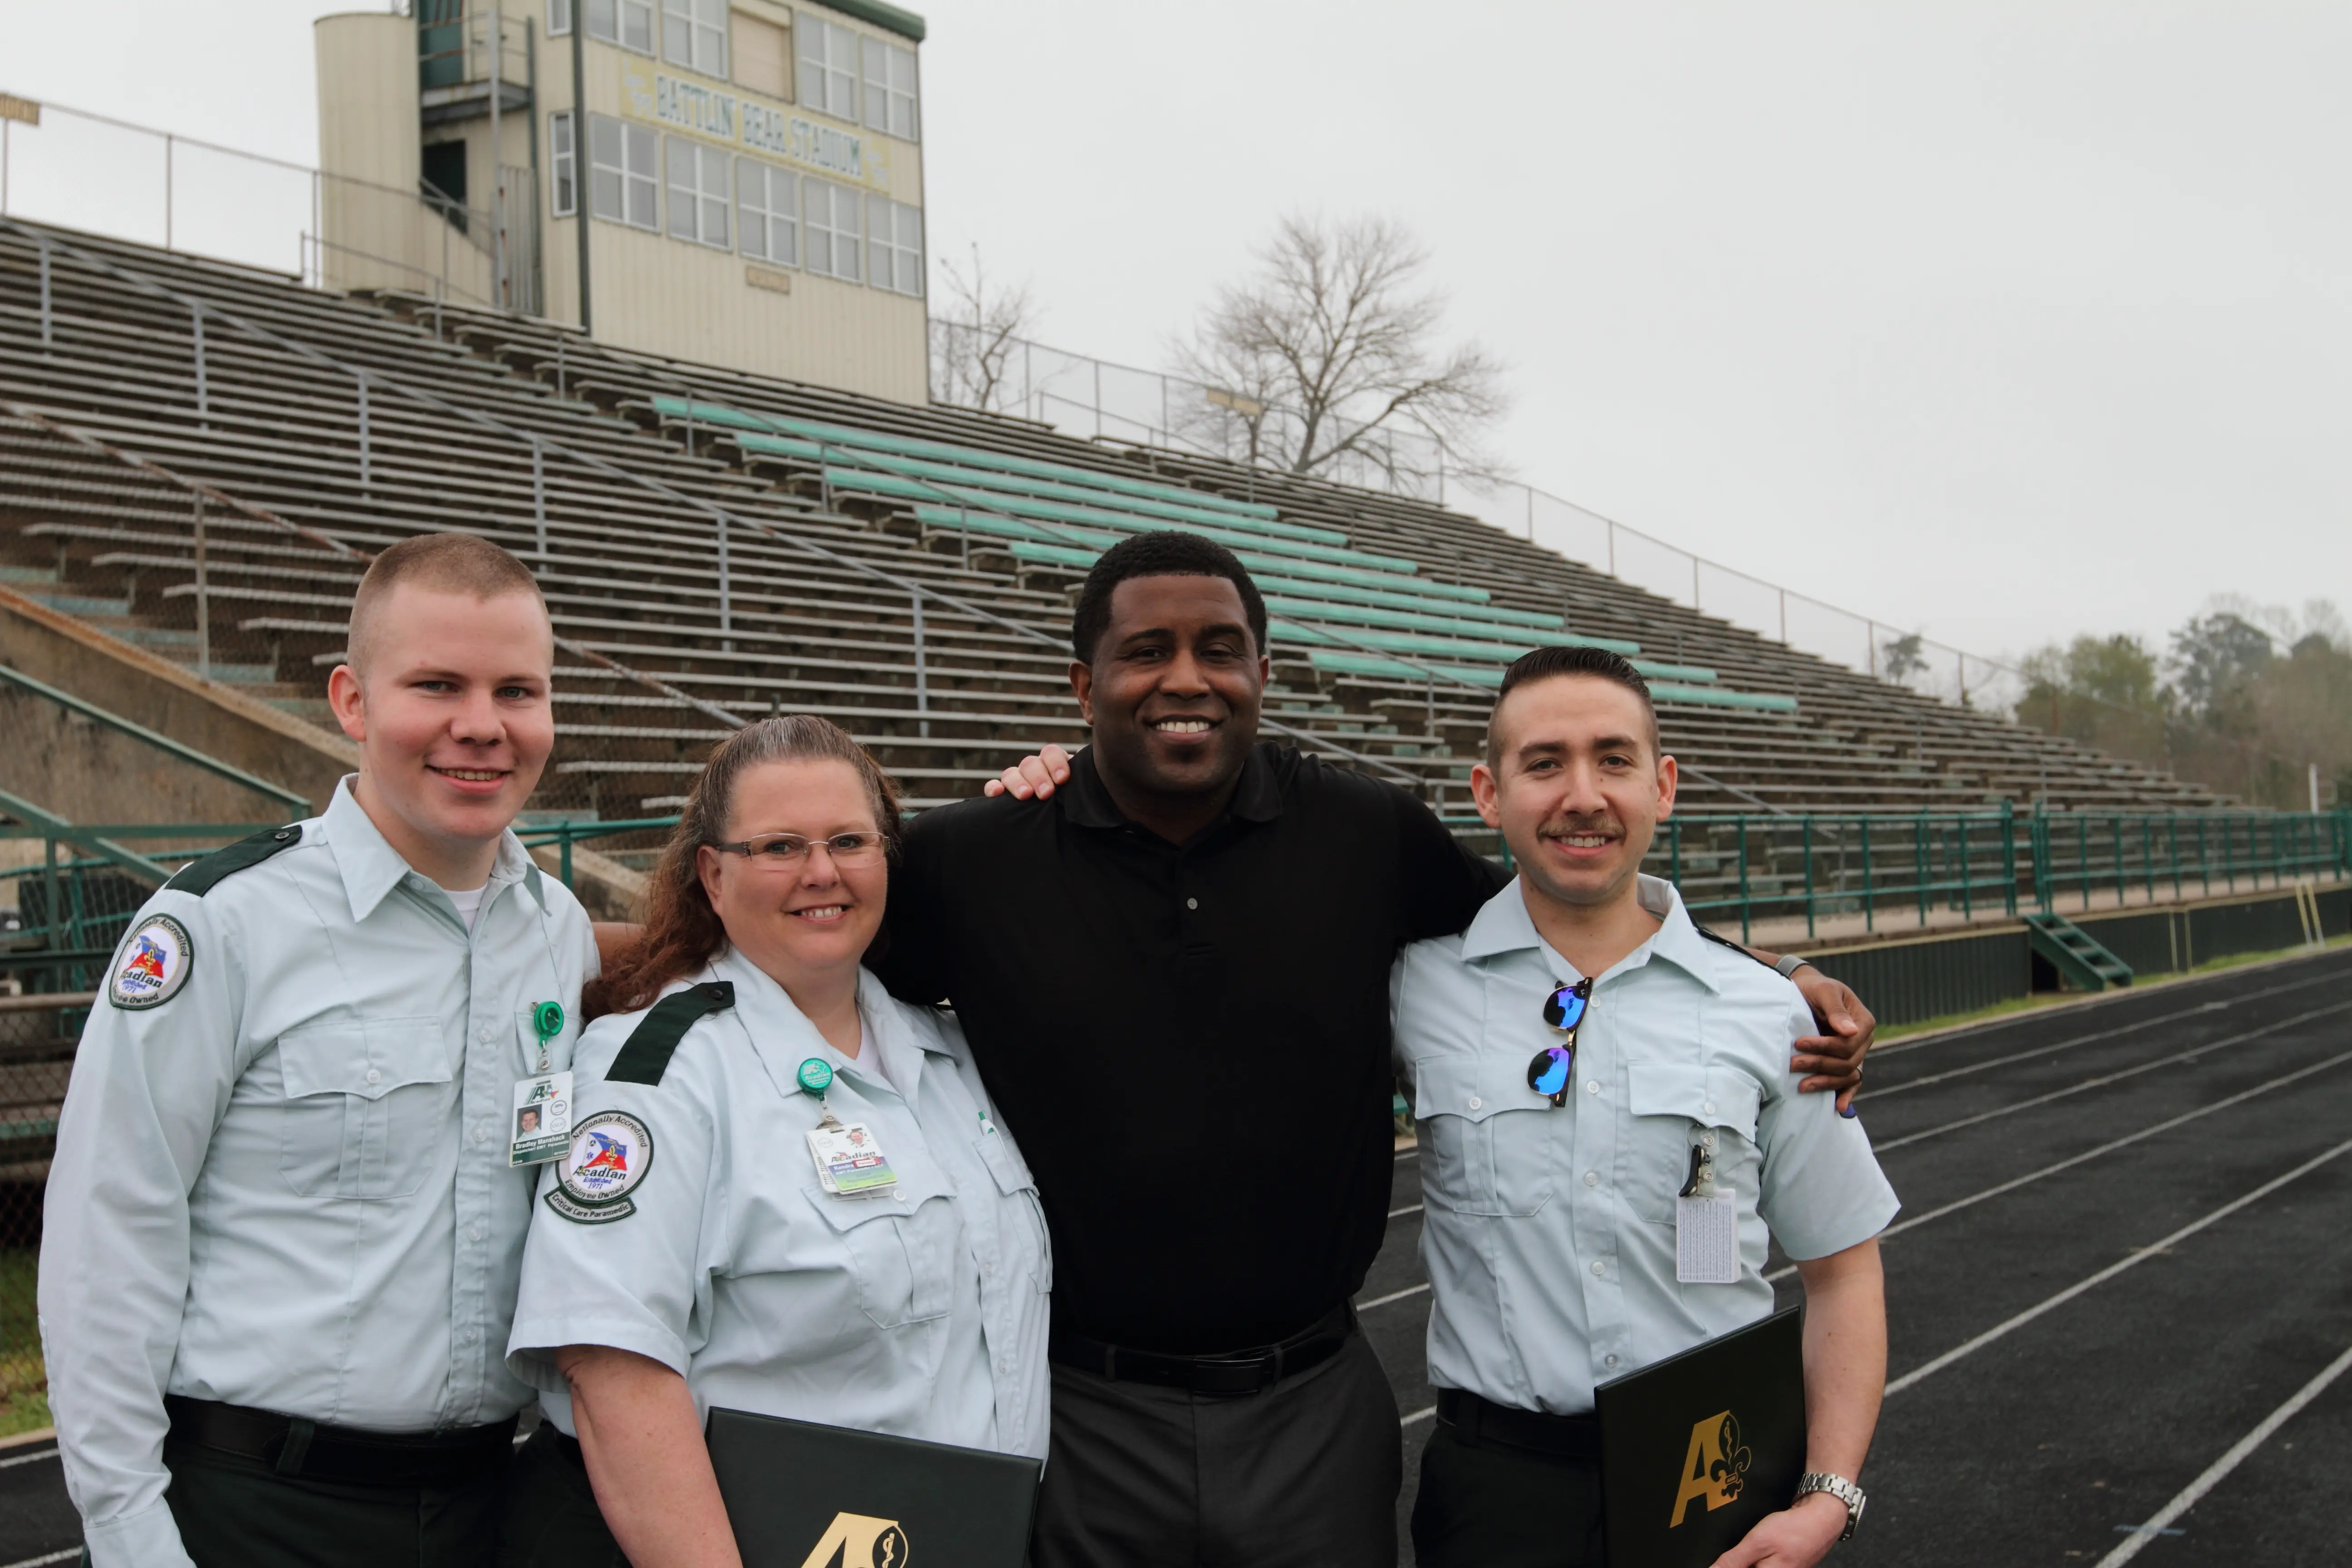 Medics reunite with patient at local track & field